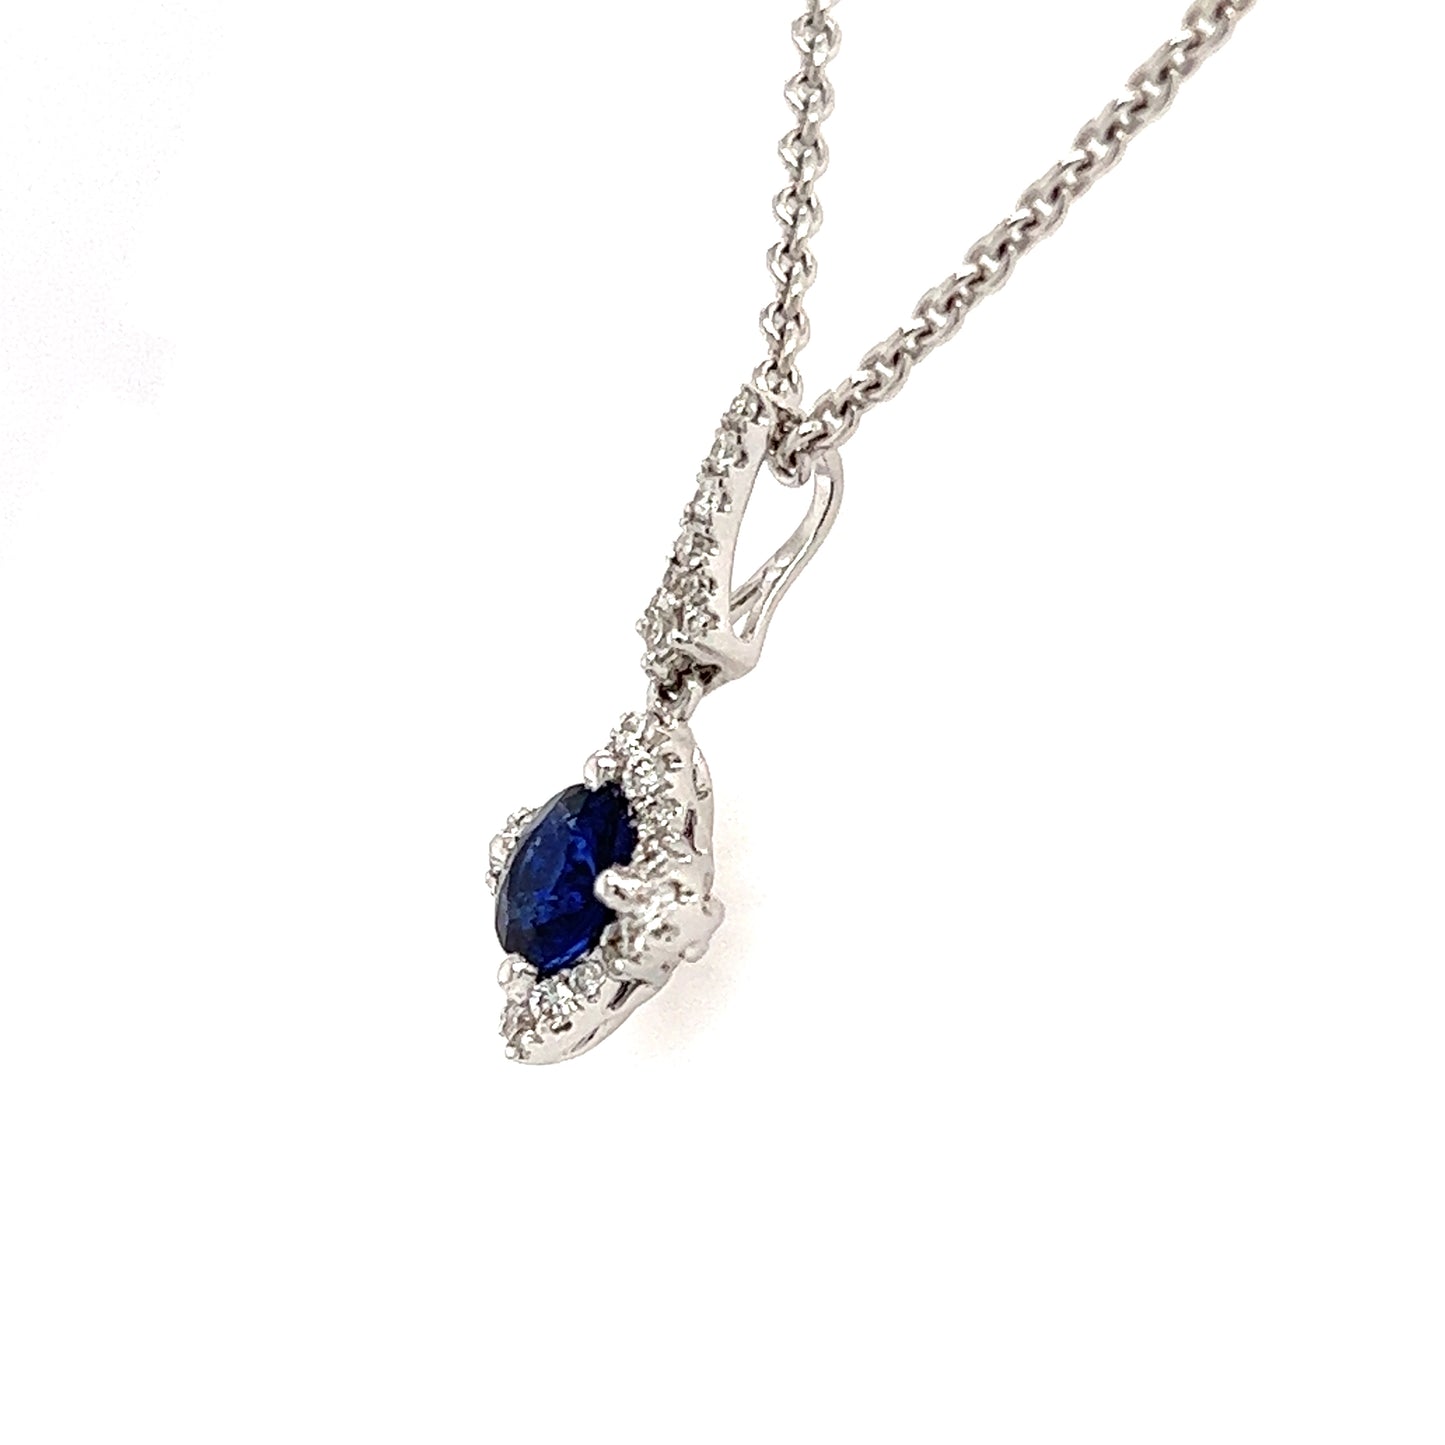 Floral Round Sapphire Pendant with 29 Diamonds in 18K White Gold Pendant and Chain Left Side View